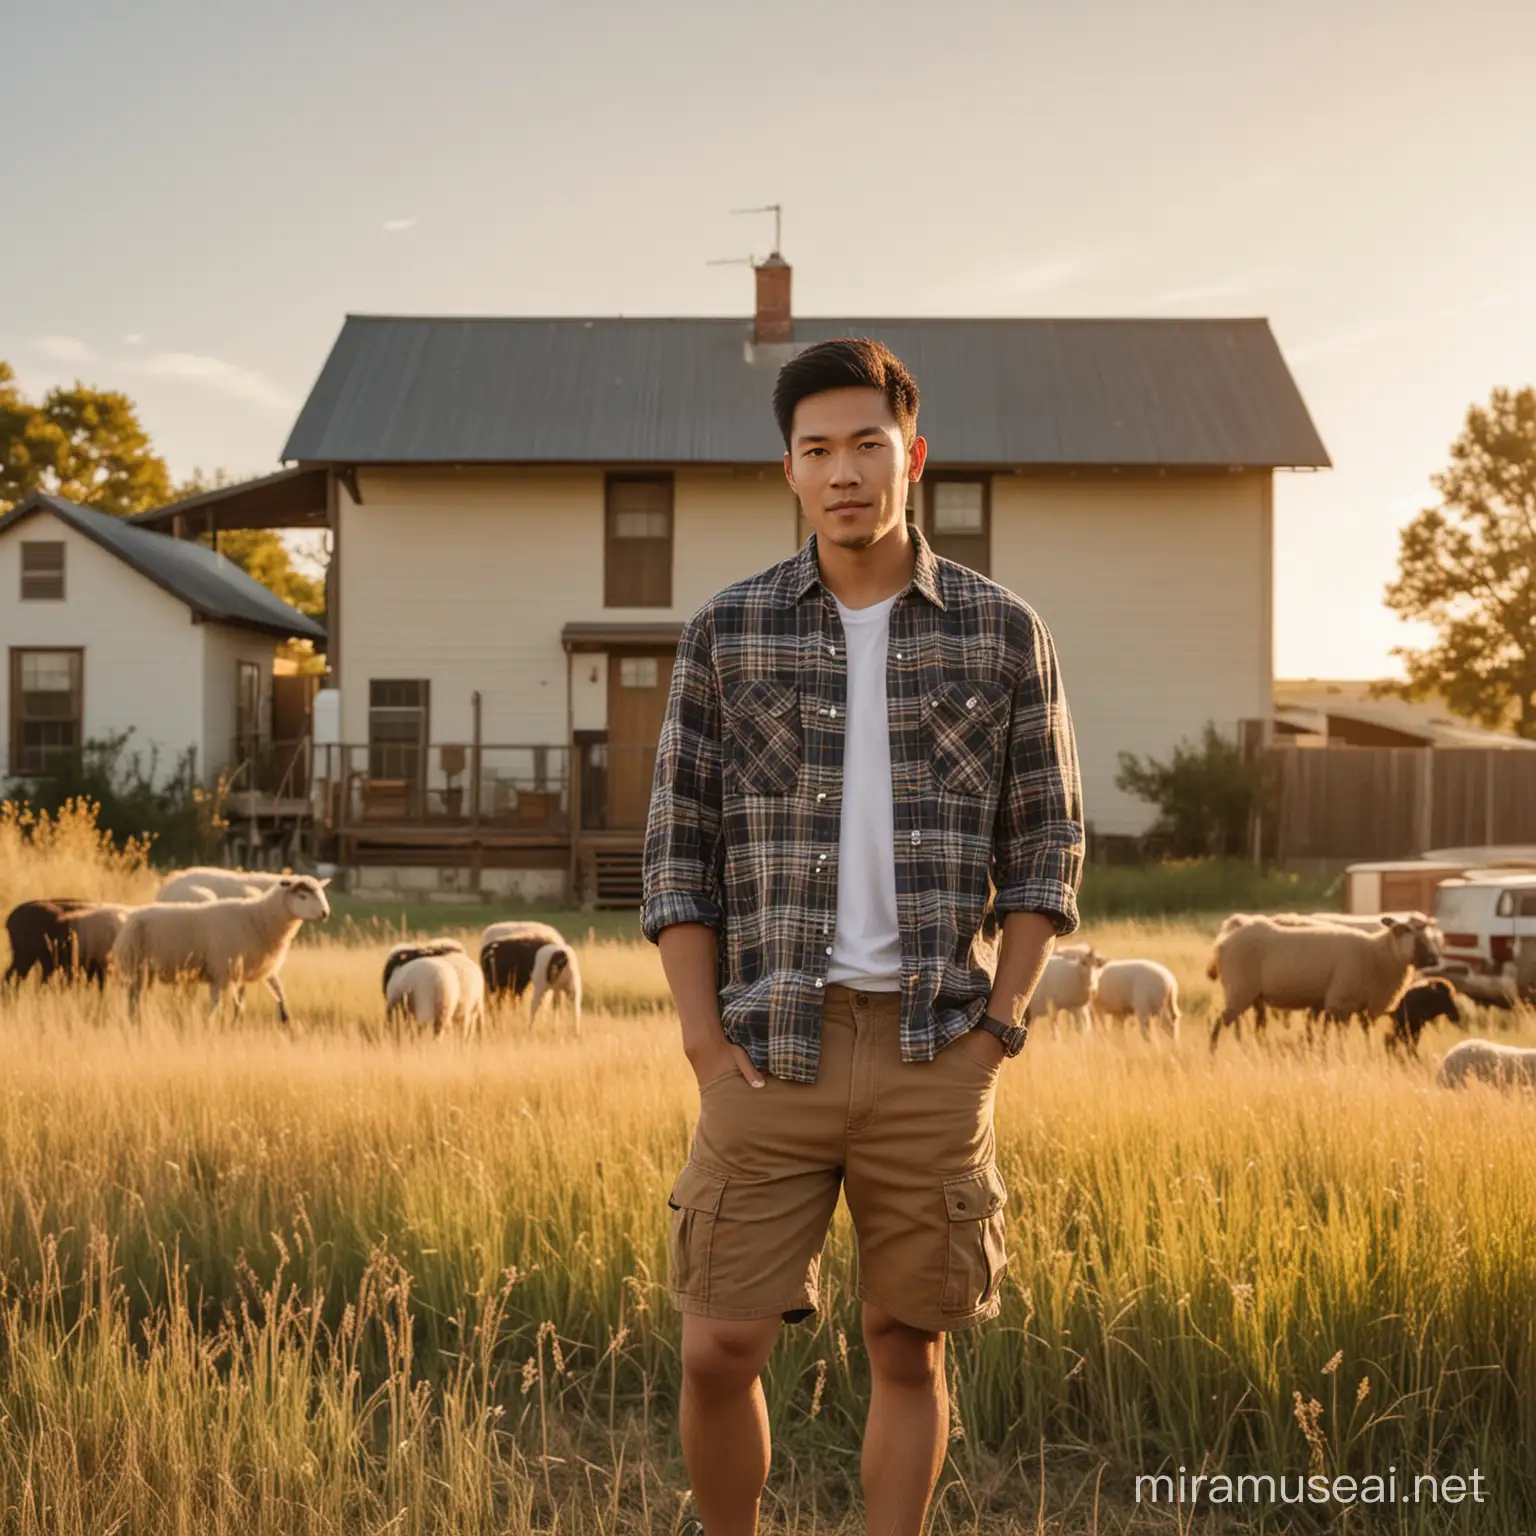 Cinematic Portrait of a Photographer in a Texas Field with Sheep